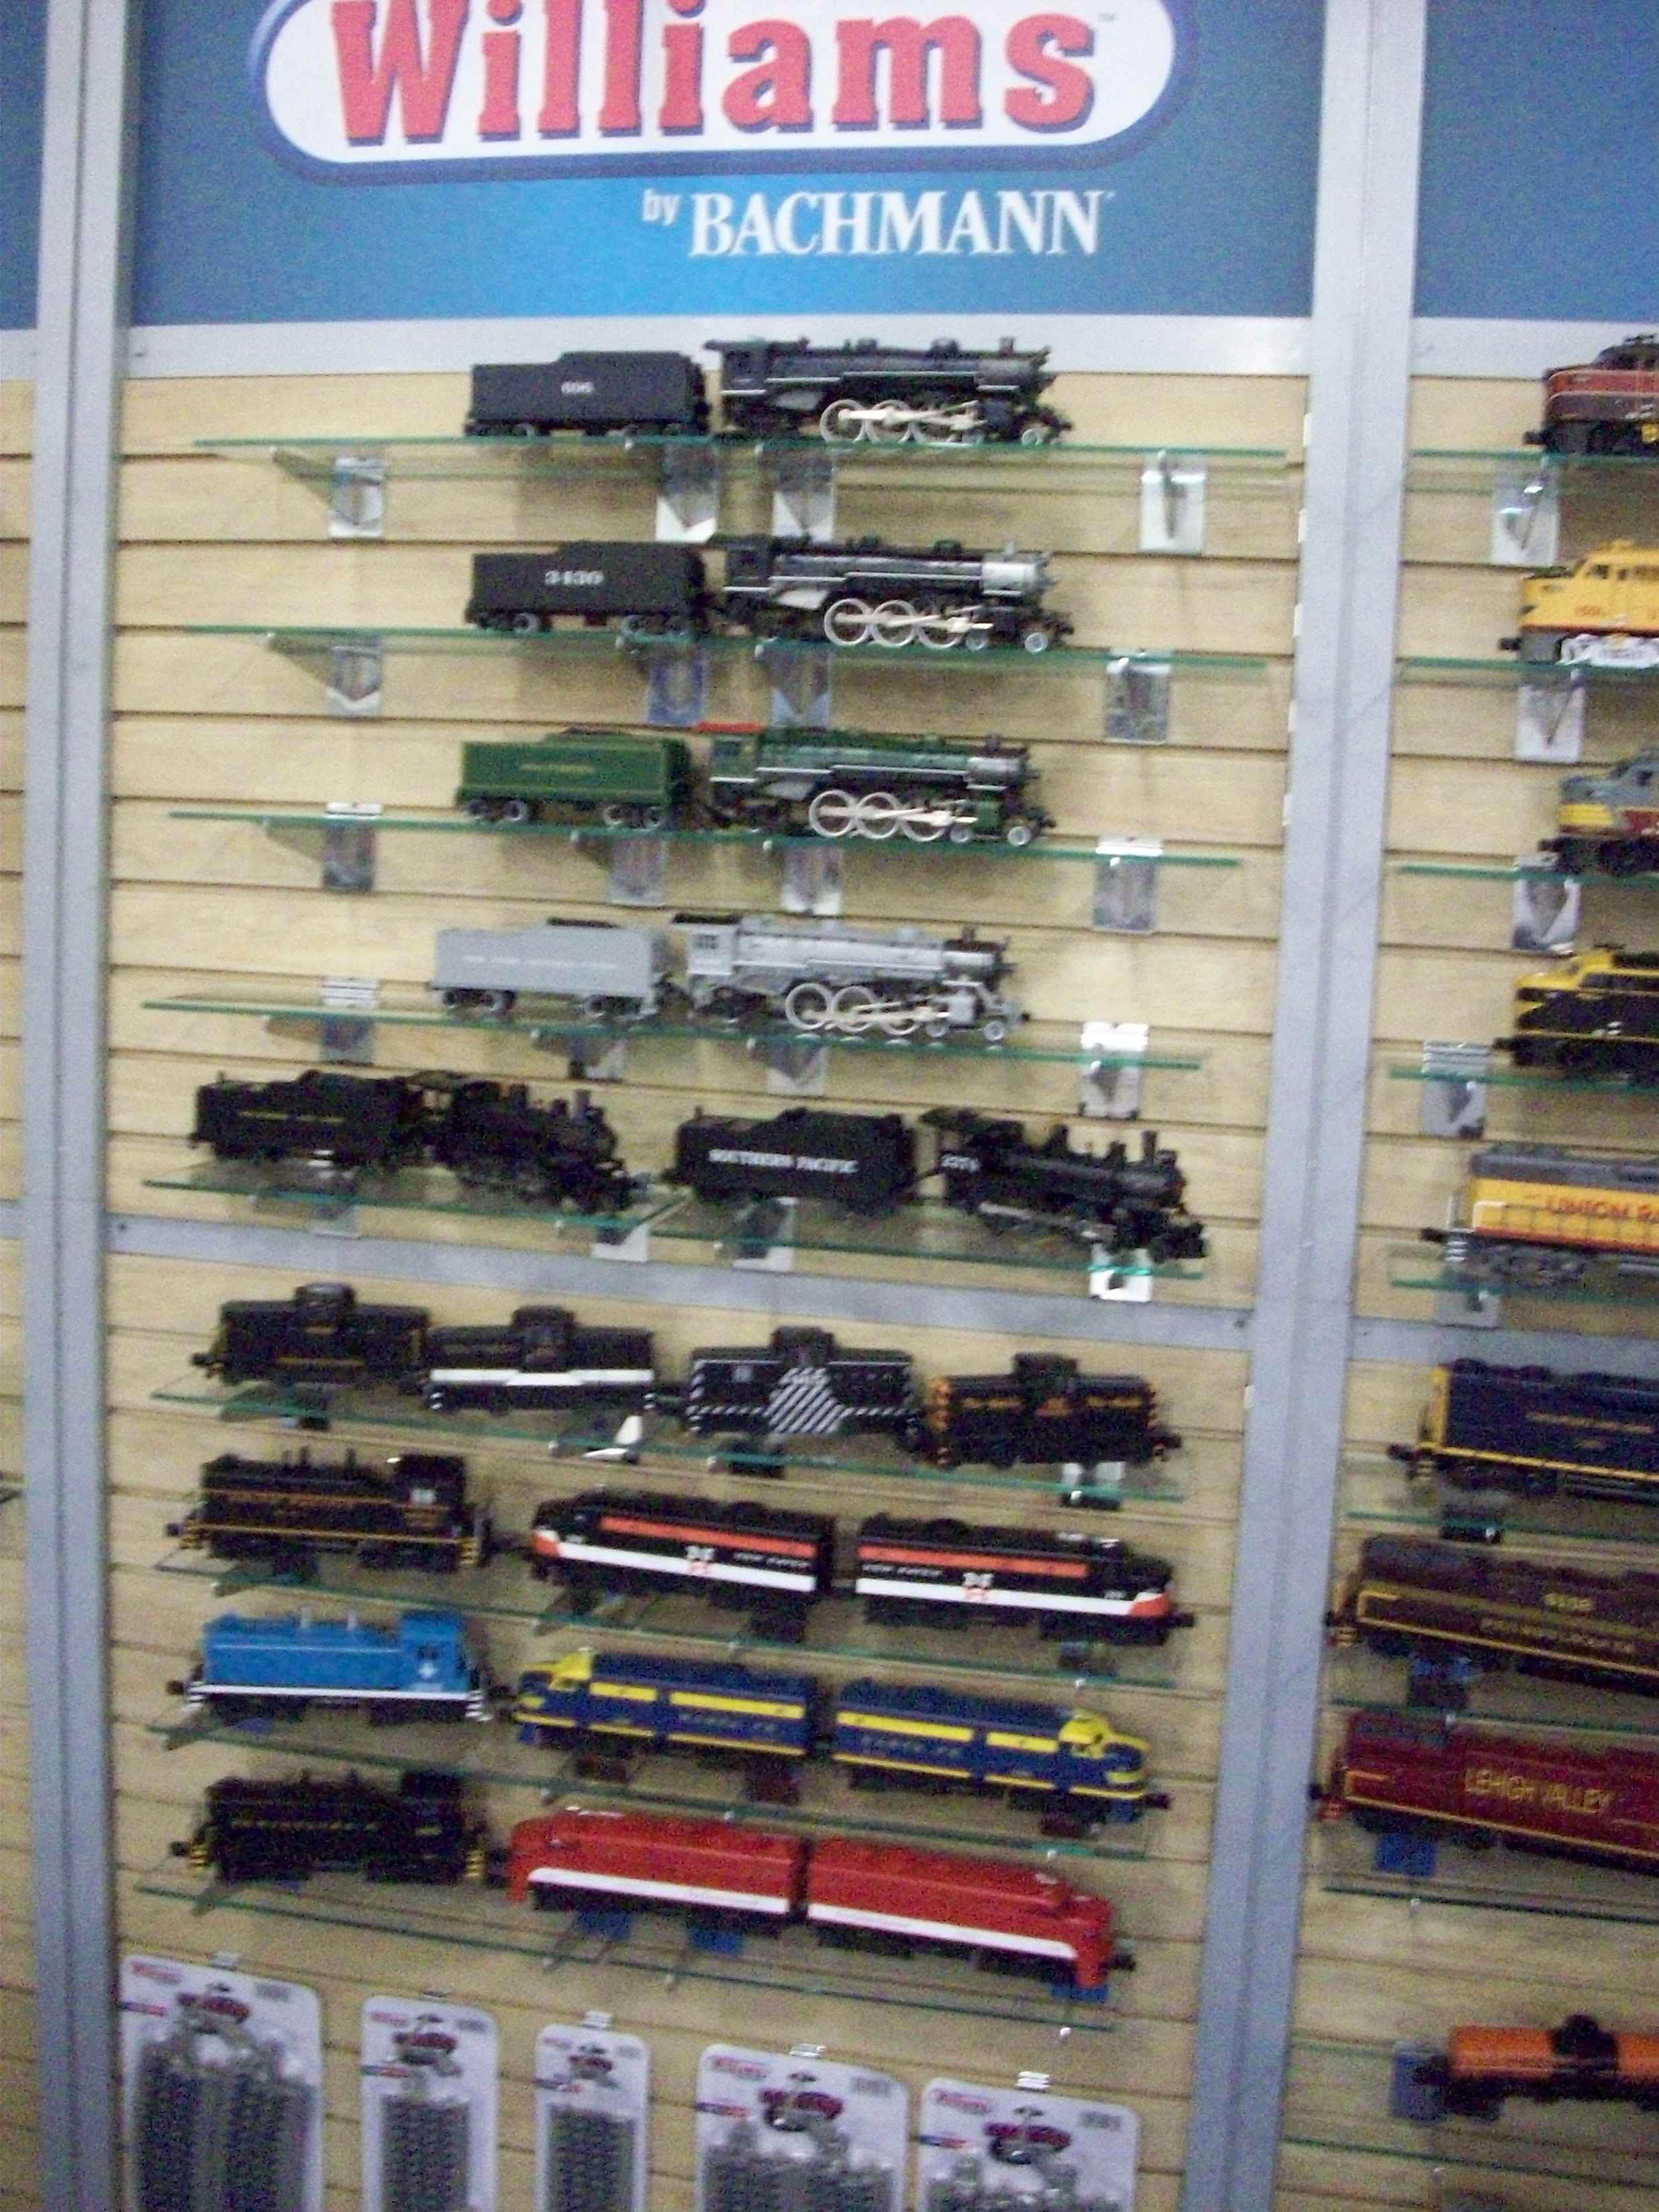 The Bachmann booth featured the full range of Bachmann model railroad 